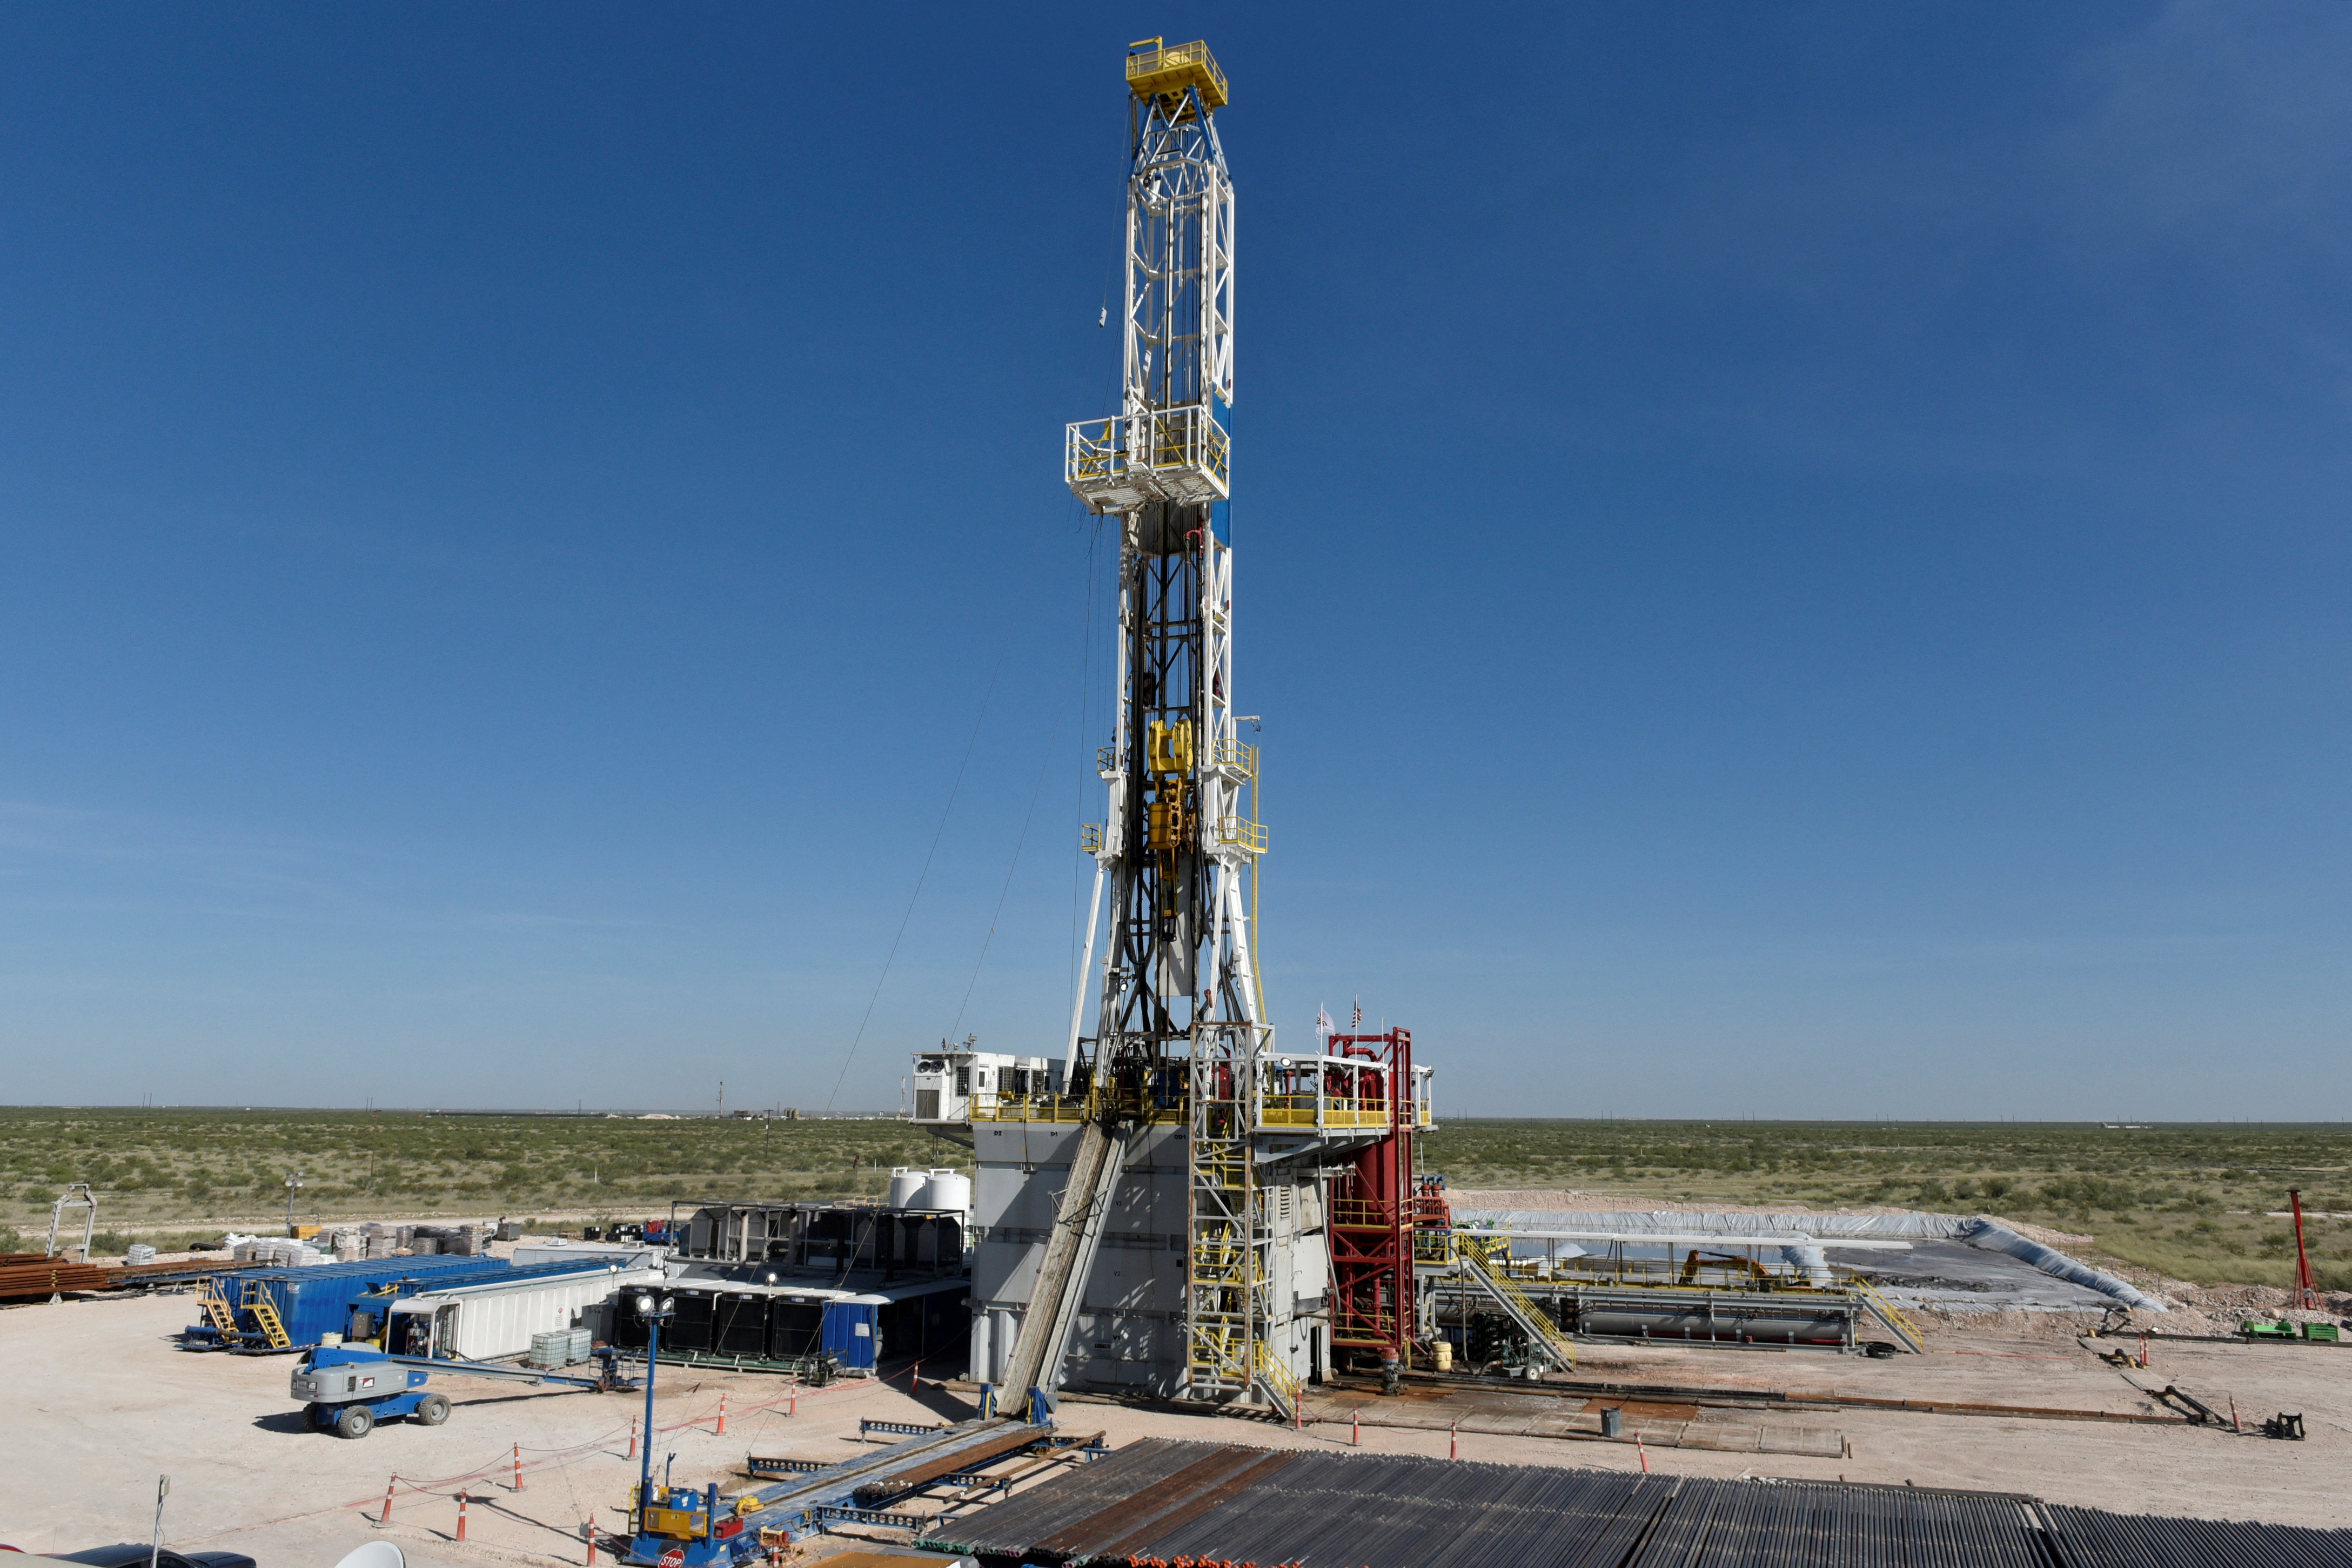 A drilling rig on a lease owned by Oasis Petroleum operates in the Permian Basin oil and natural gas production area near Wink